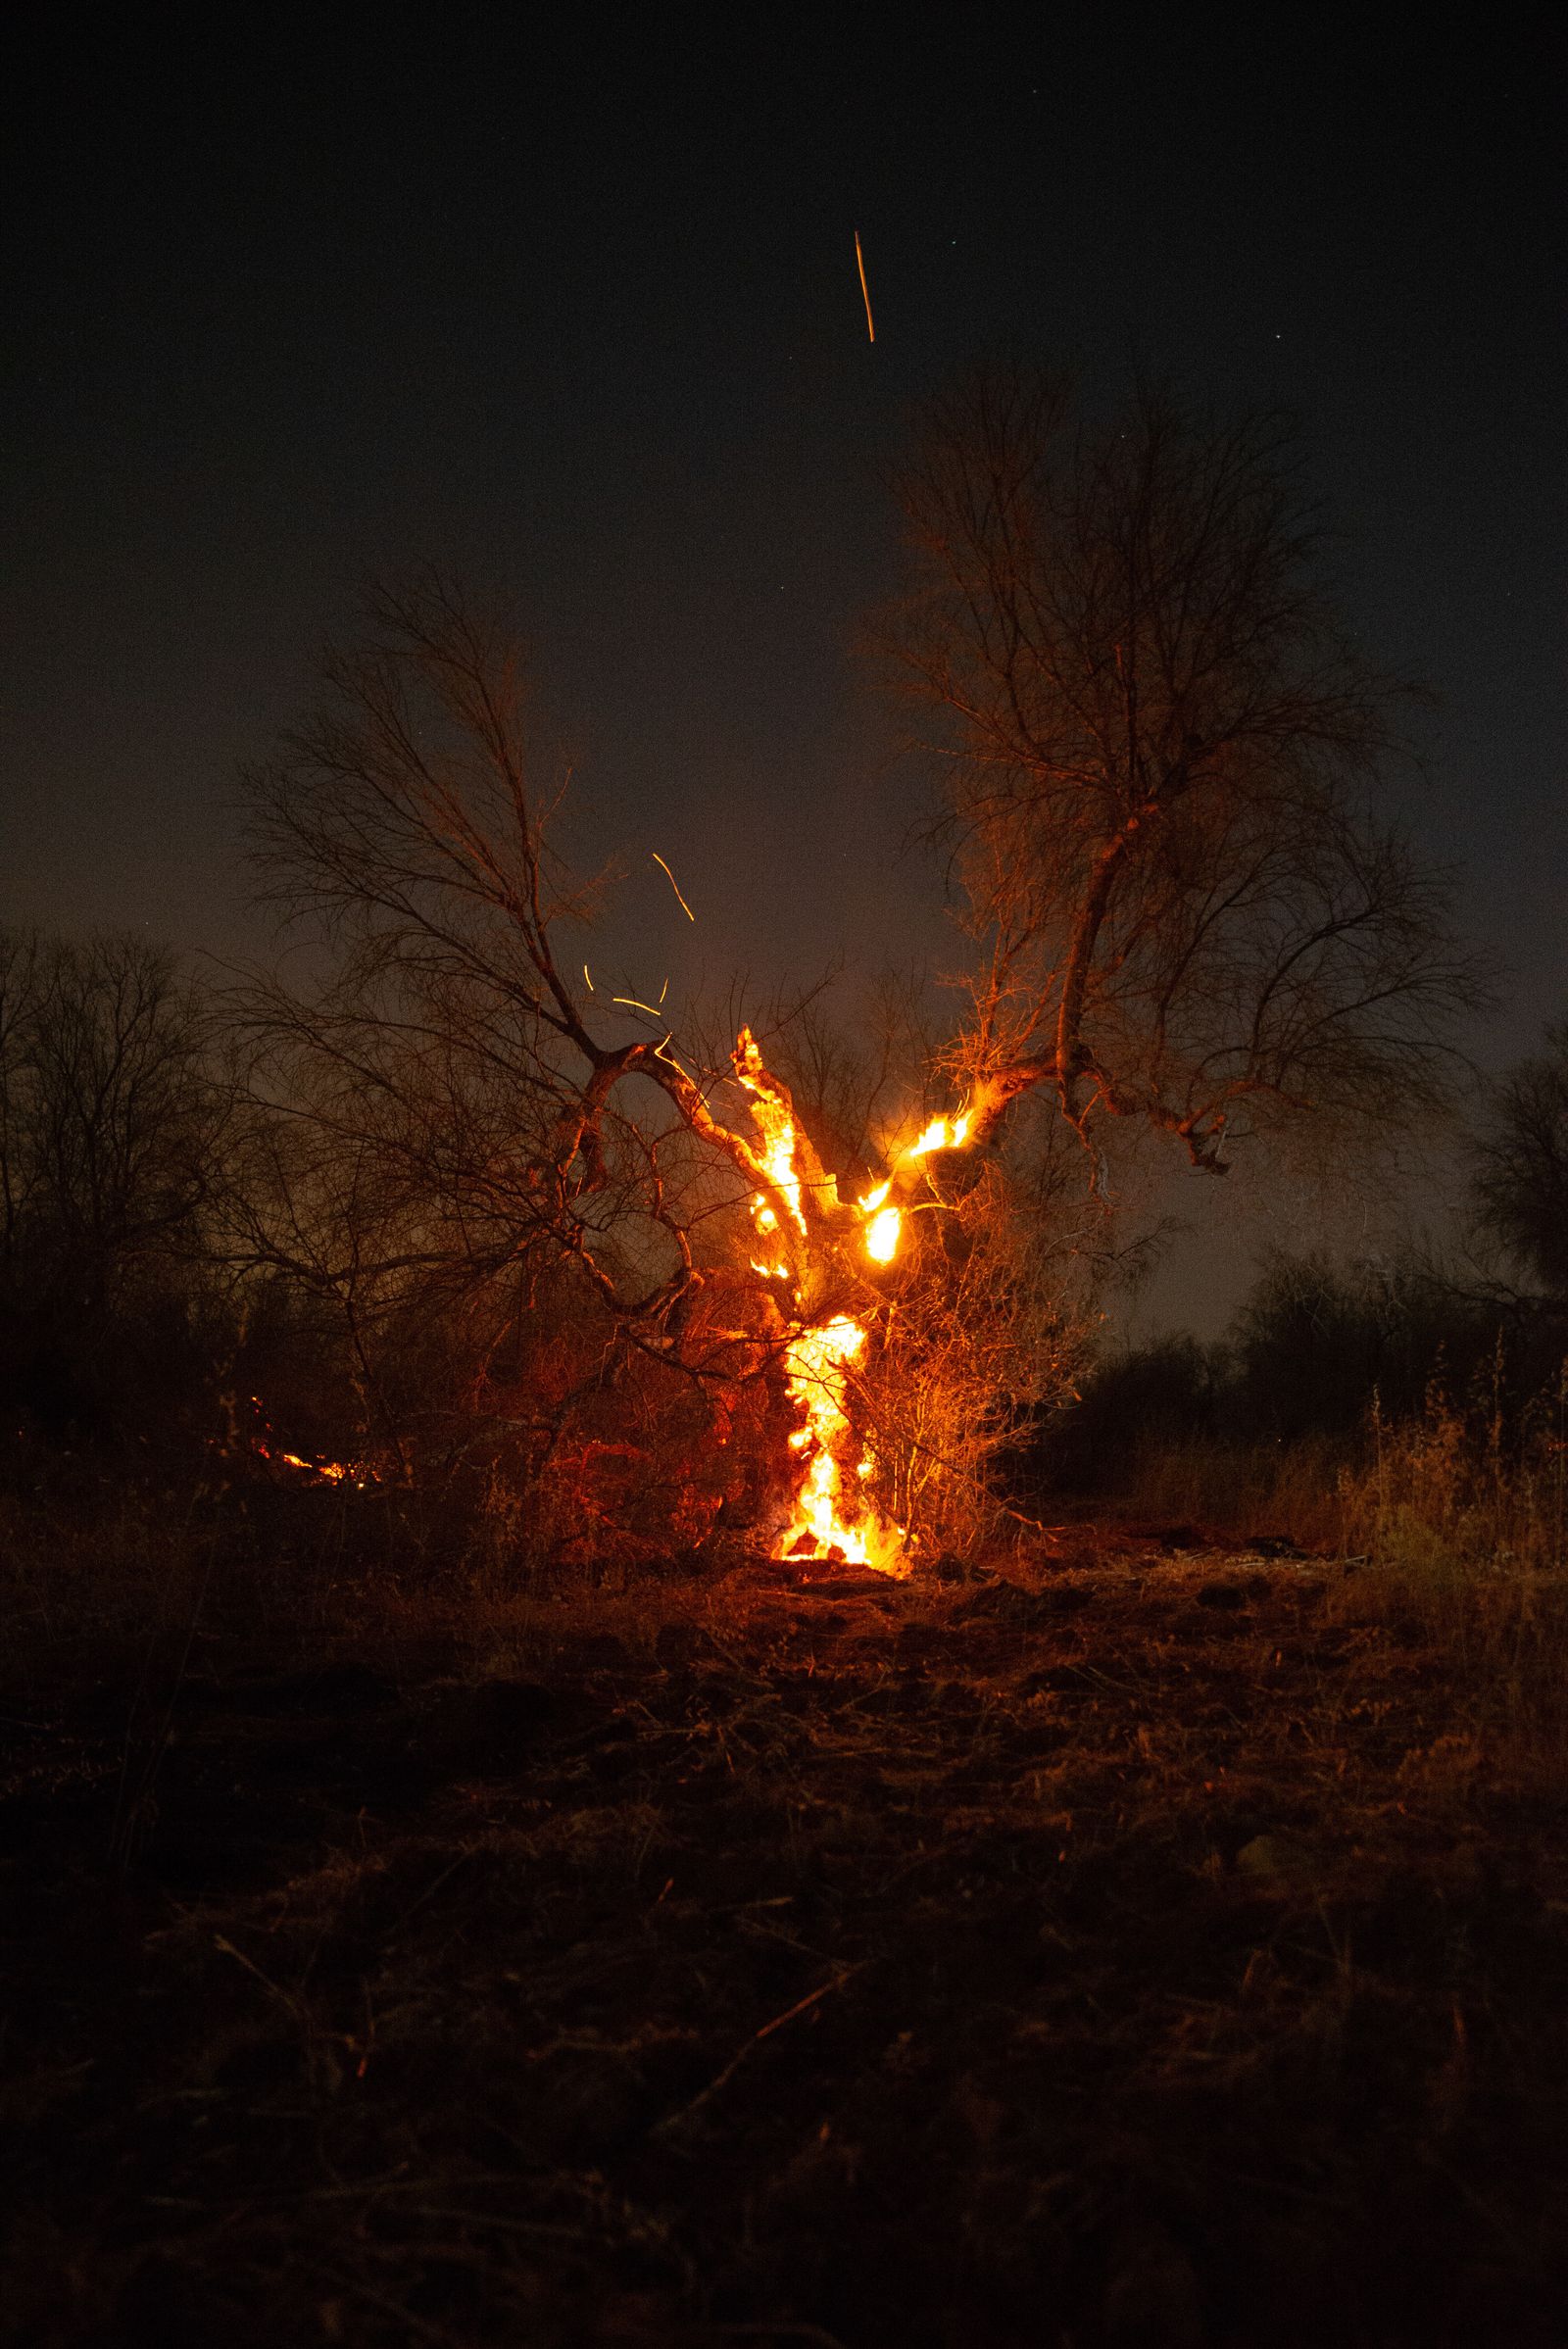 © Veronica Andrea Sauchelli - Copertino, Lecce An olive tree in flames during a fire that involved more than a thousand trees.